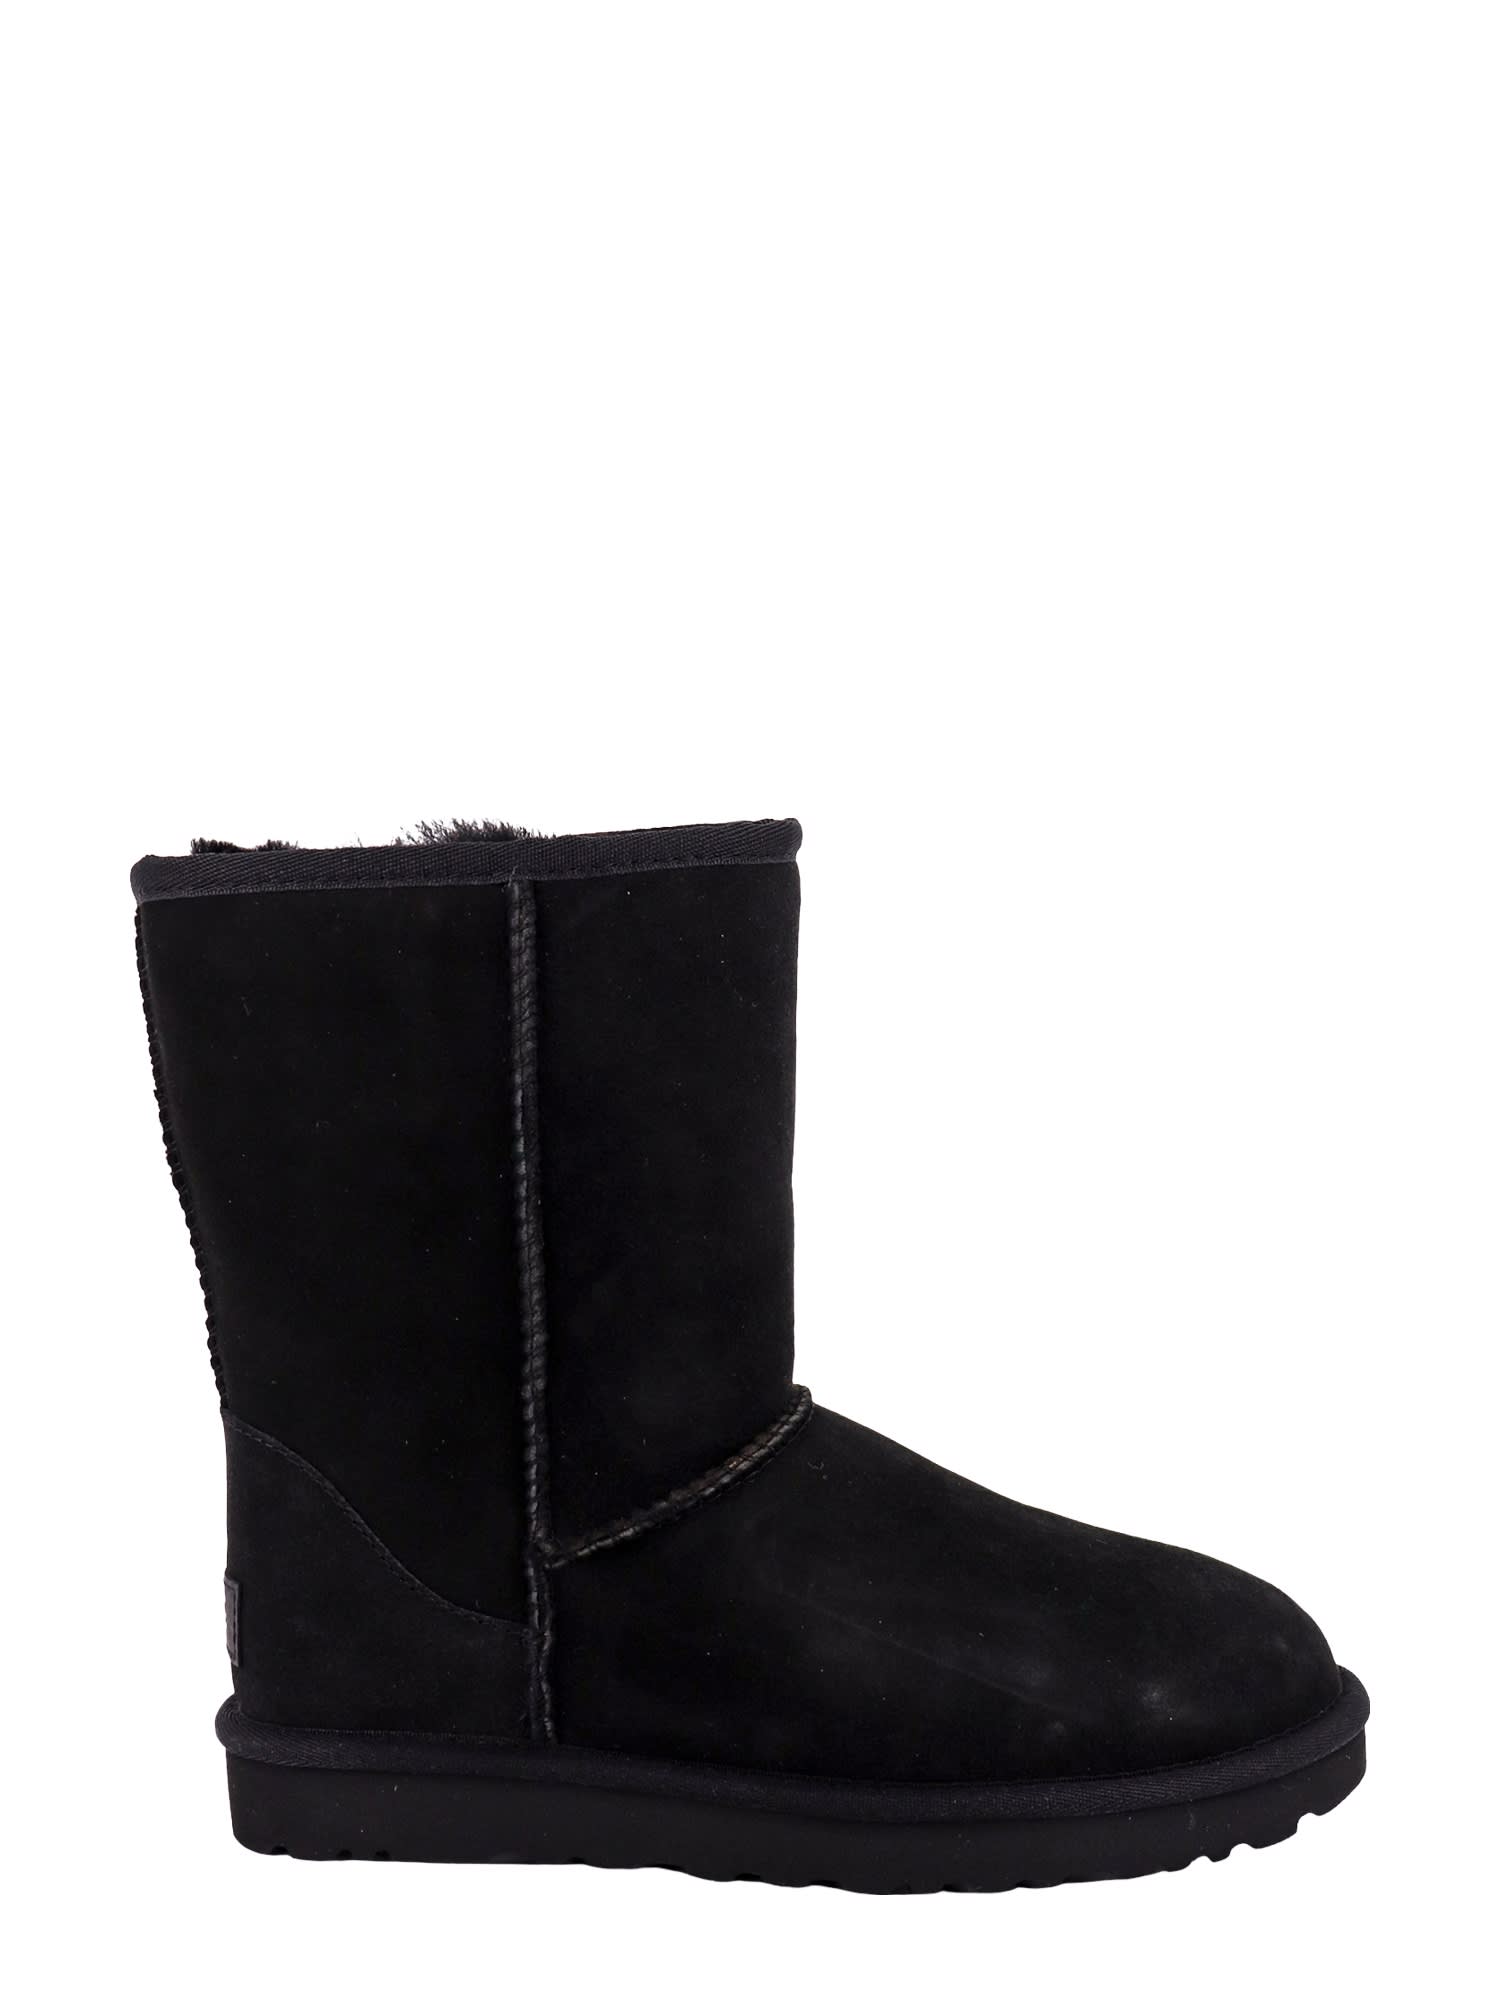 Shop Ugg Classic Short Ankle Boots In Black